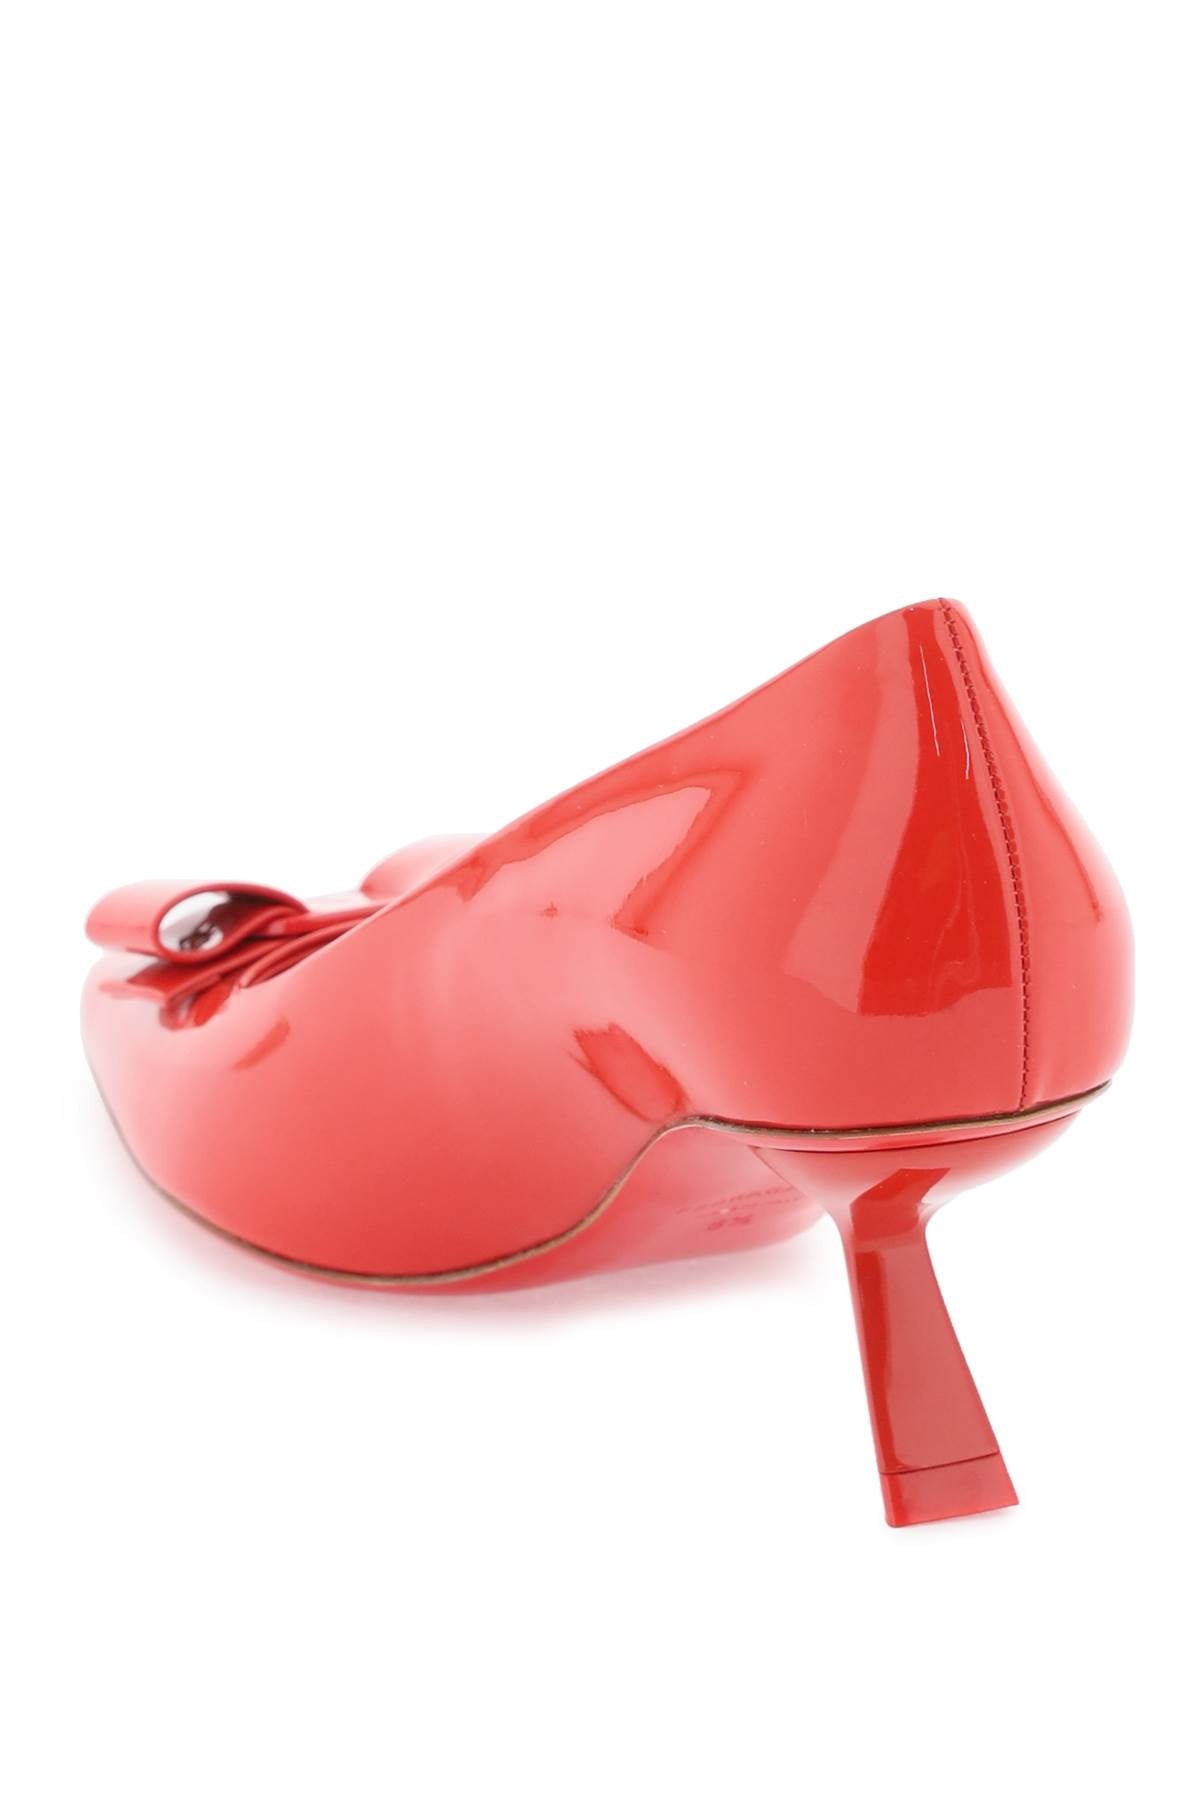 Shop Ferragamo Sophisticated Red Patent Leather Heels With Iconic Vara Bow